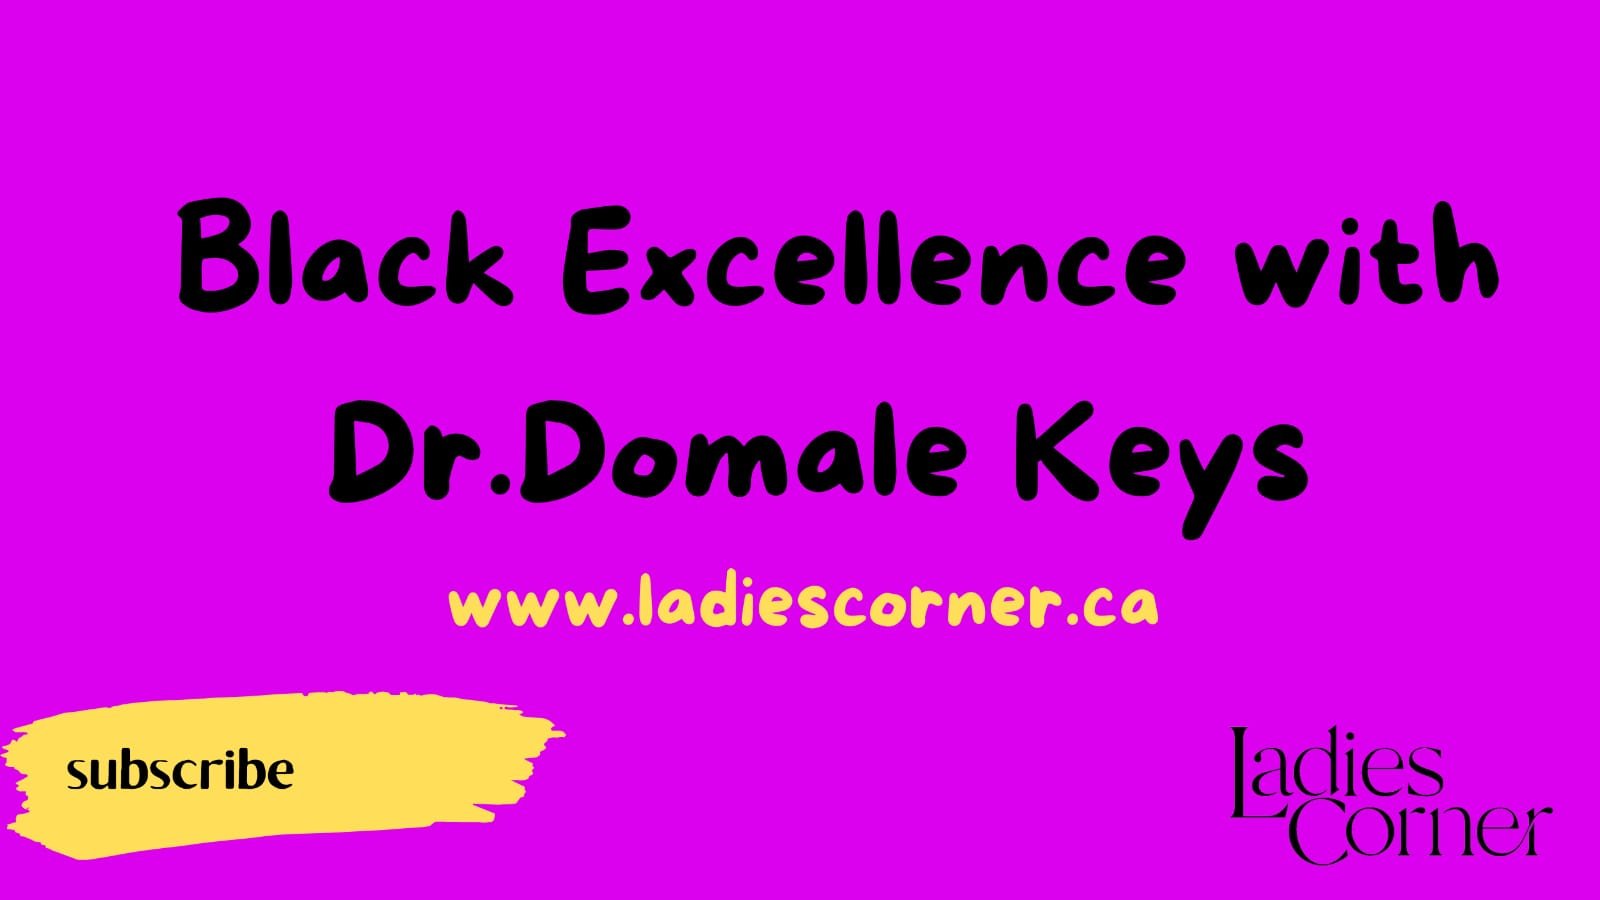 Black Excellence with Dr. Keys